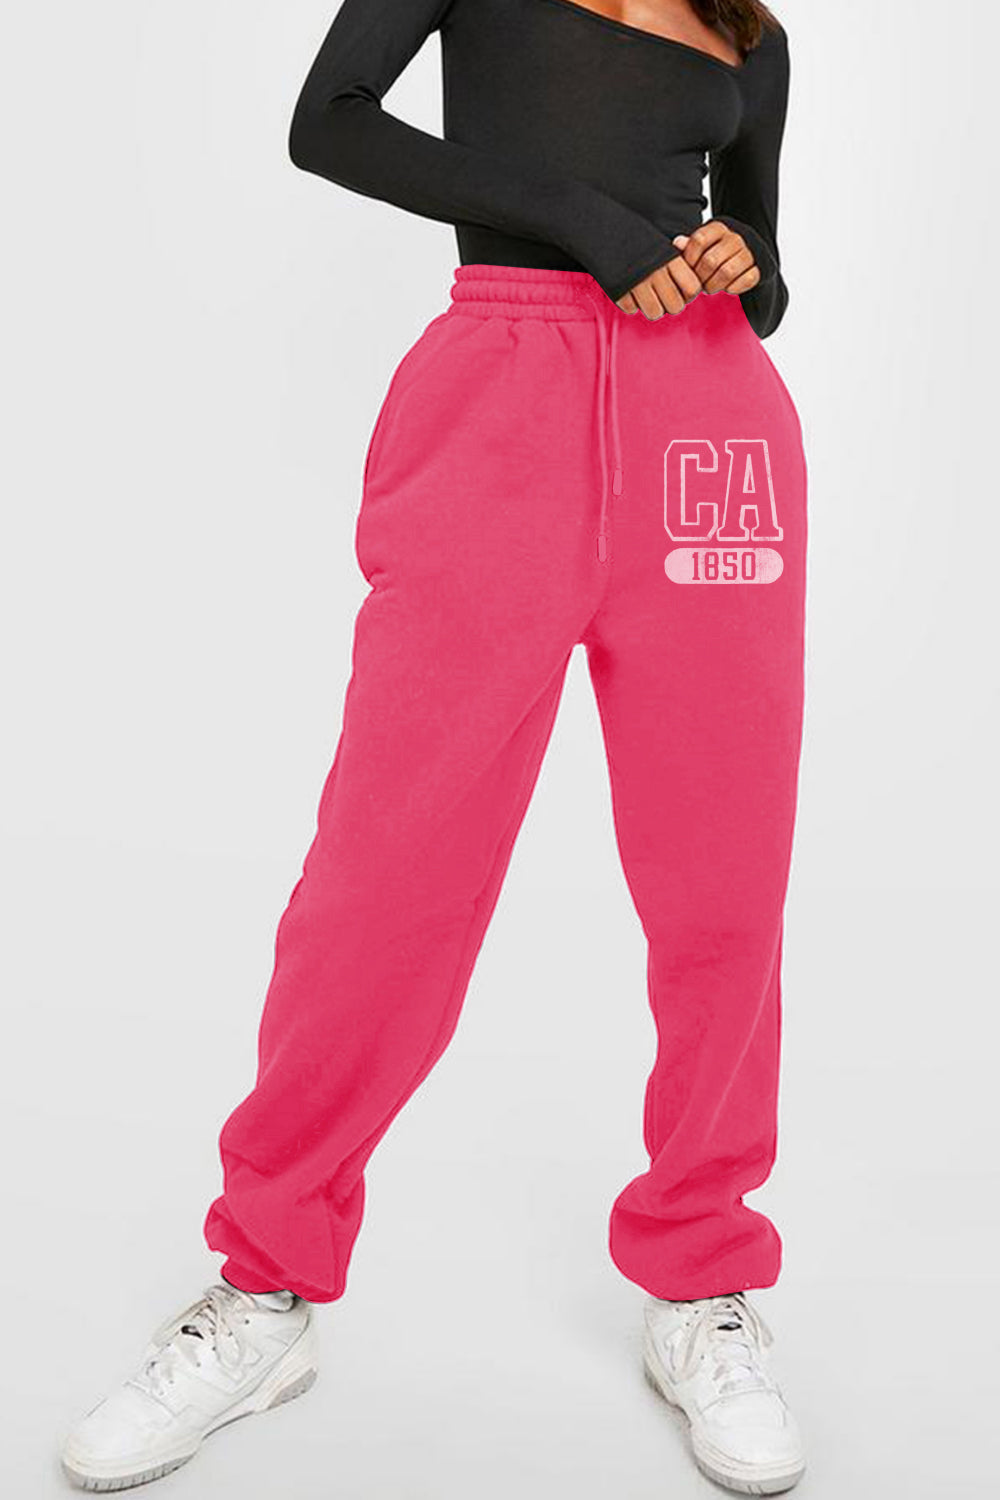 Simply Love Full Size CA 1850 Graphic Joggers